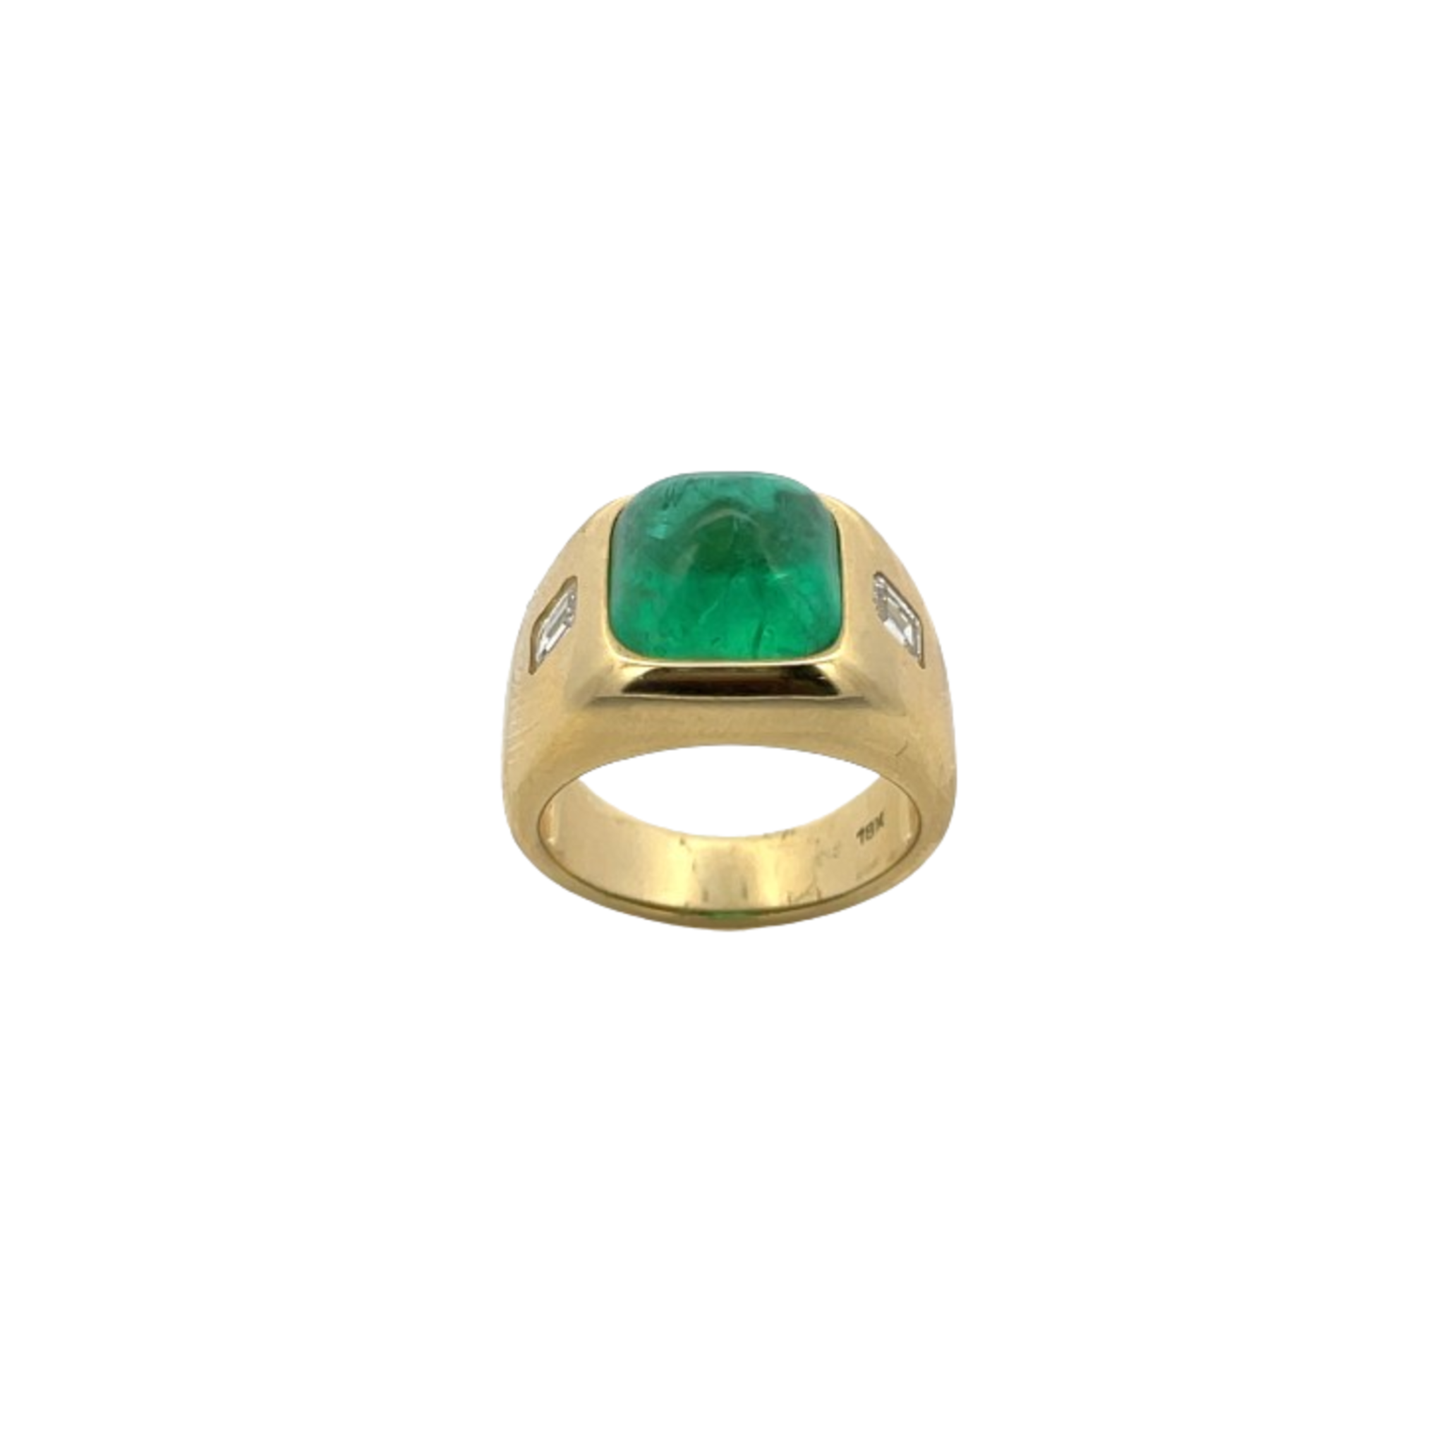 1970s 18KT Yellow Gold Emerald & Diamond Ring front